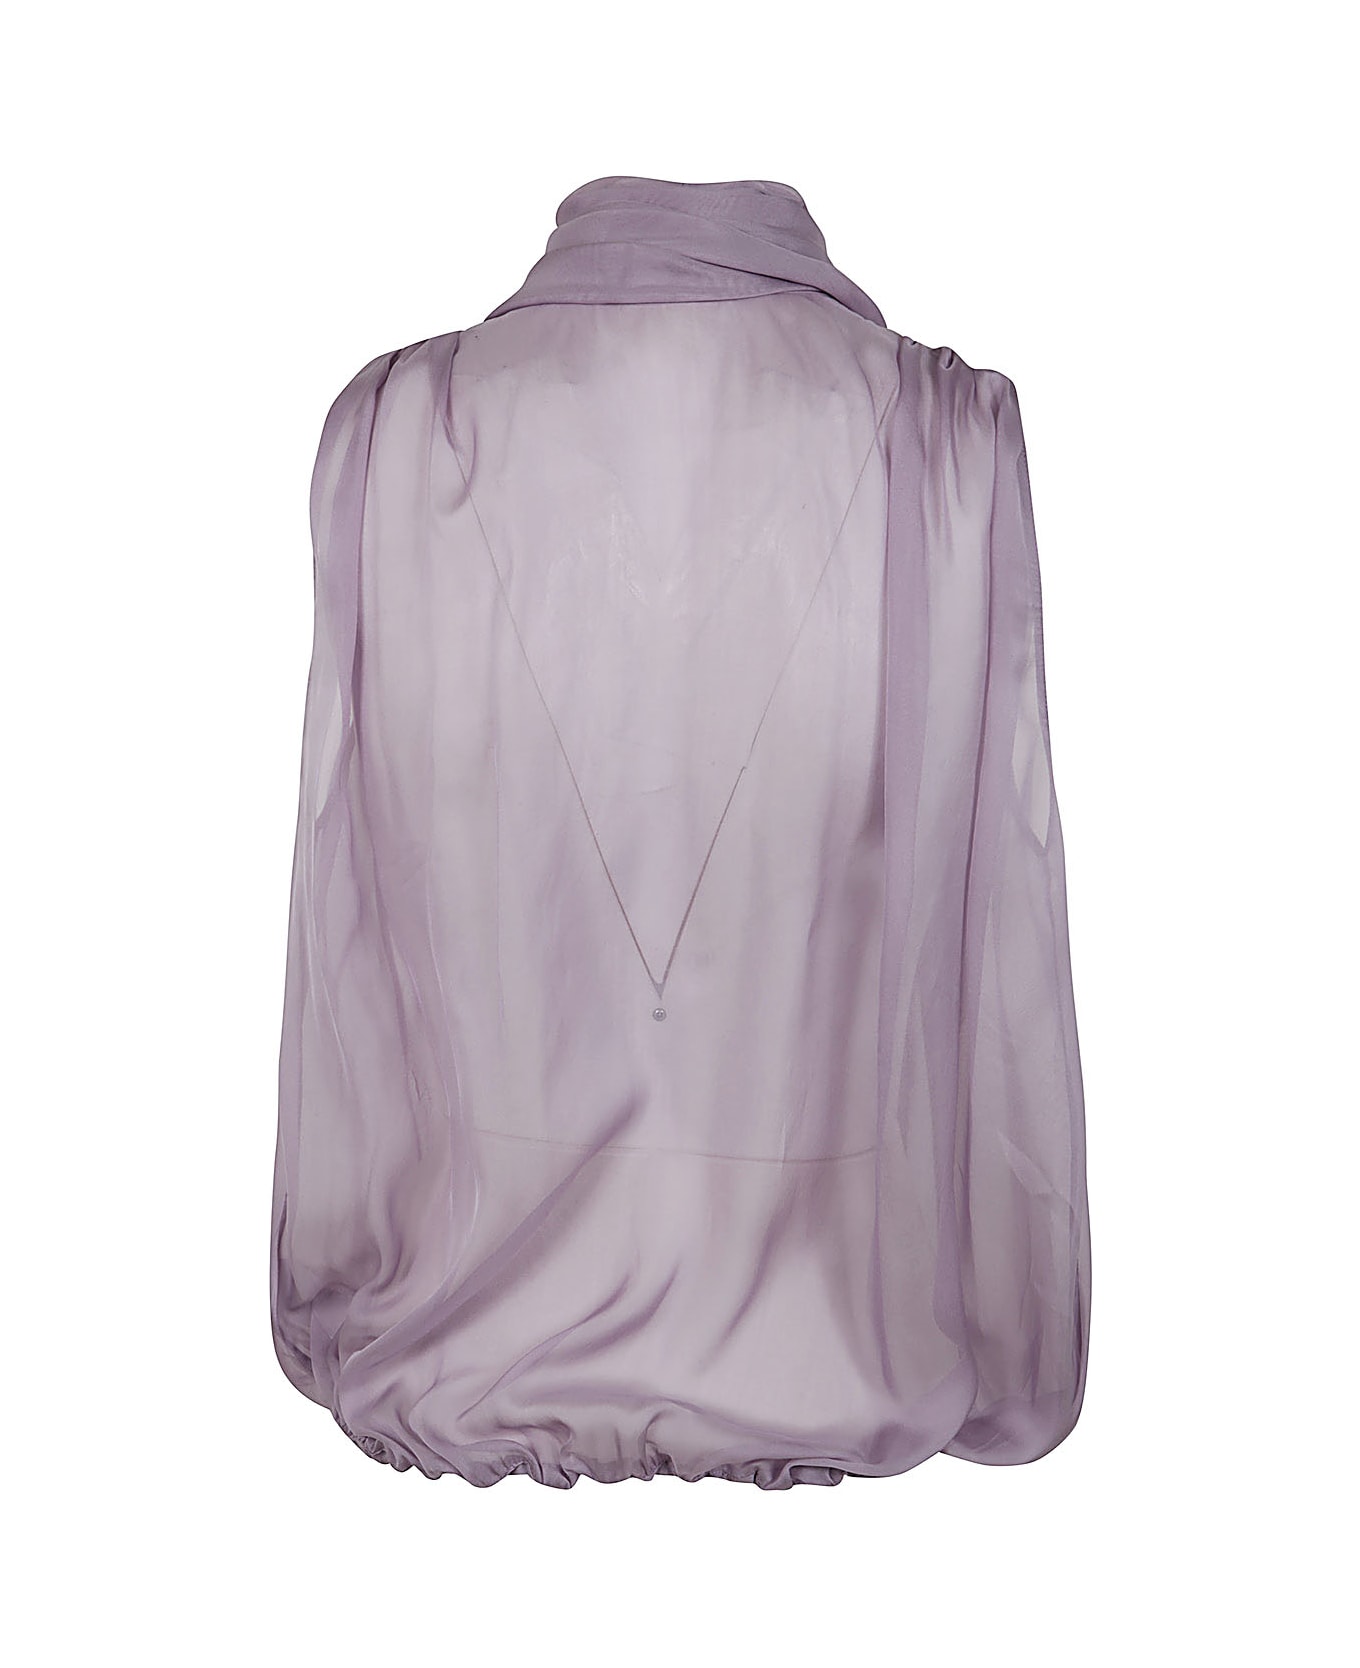 Blumarine 4c091a Blouse With Bow - Lavender